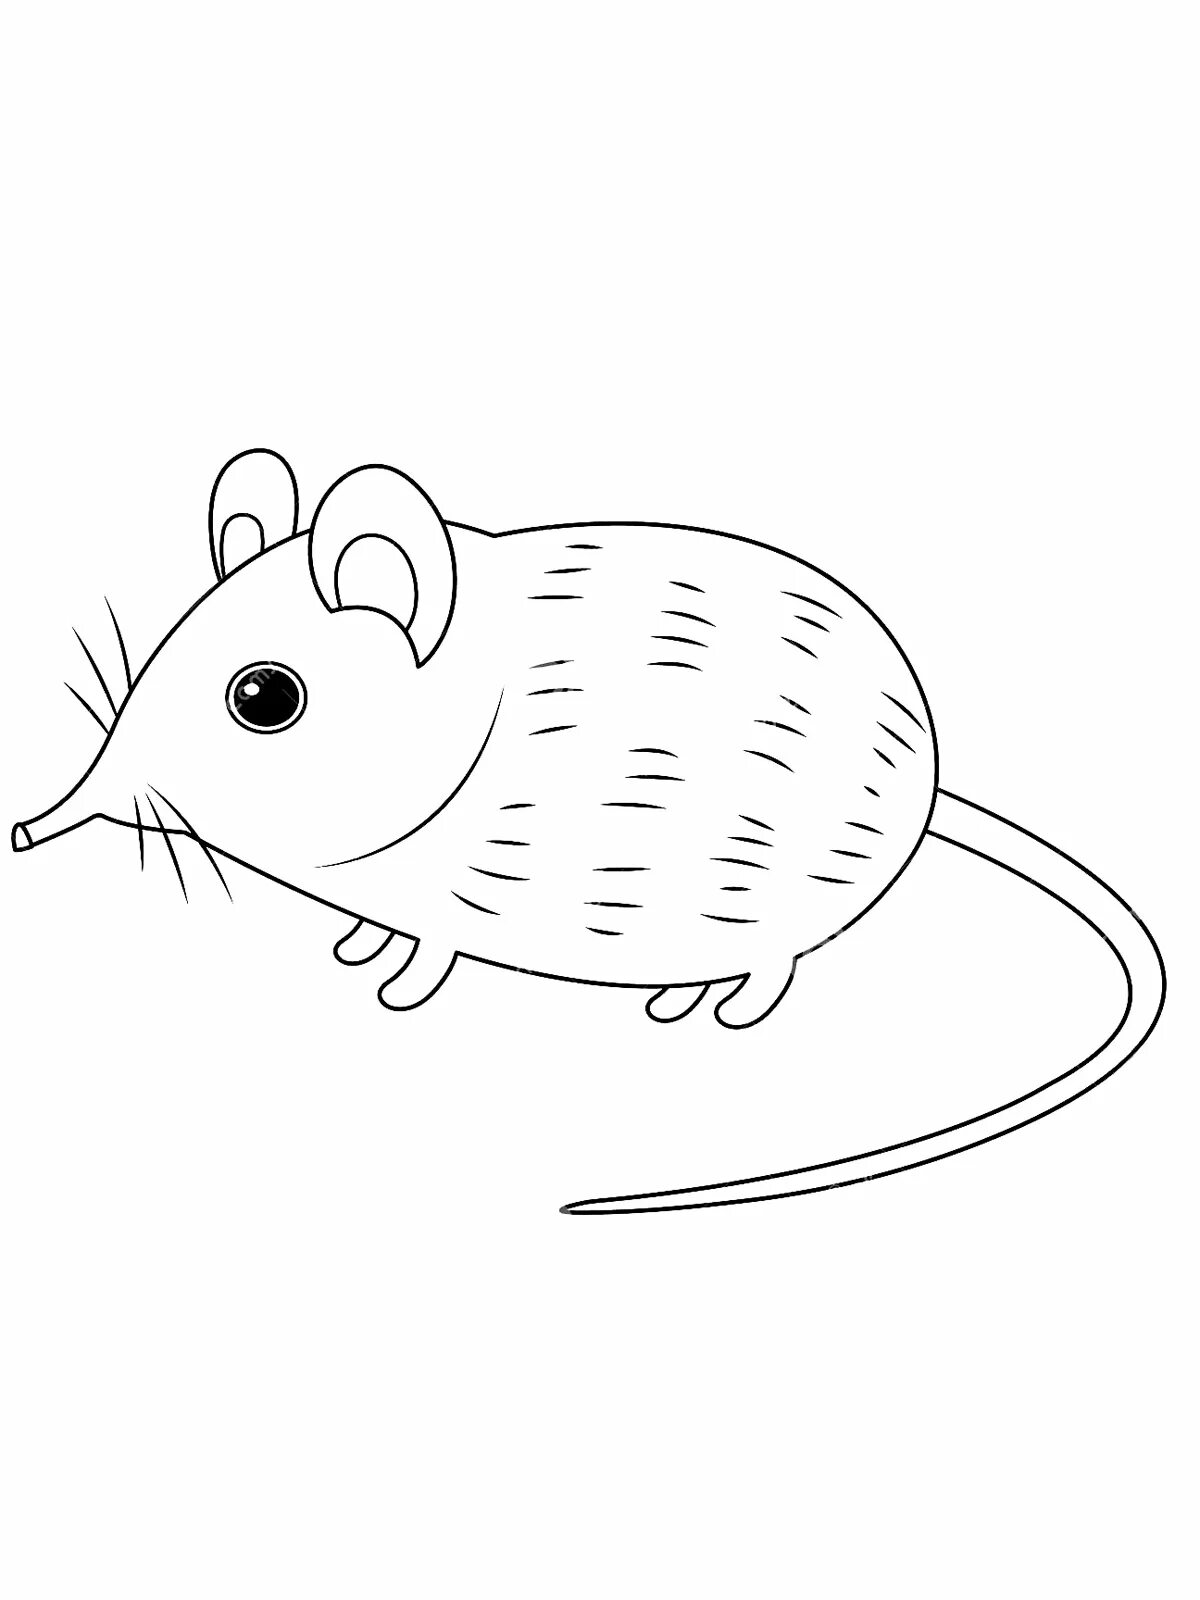 Shiny shrew coloring book for kids